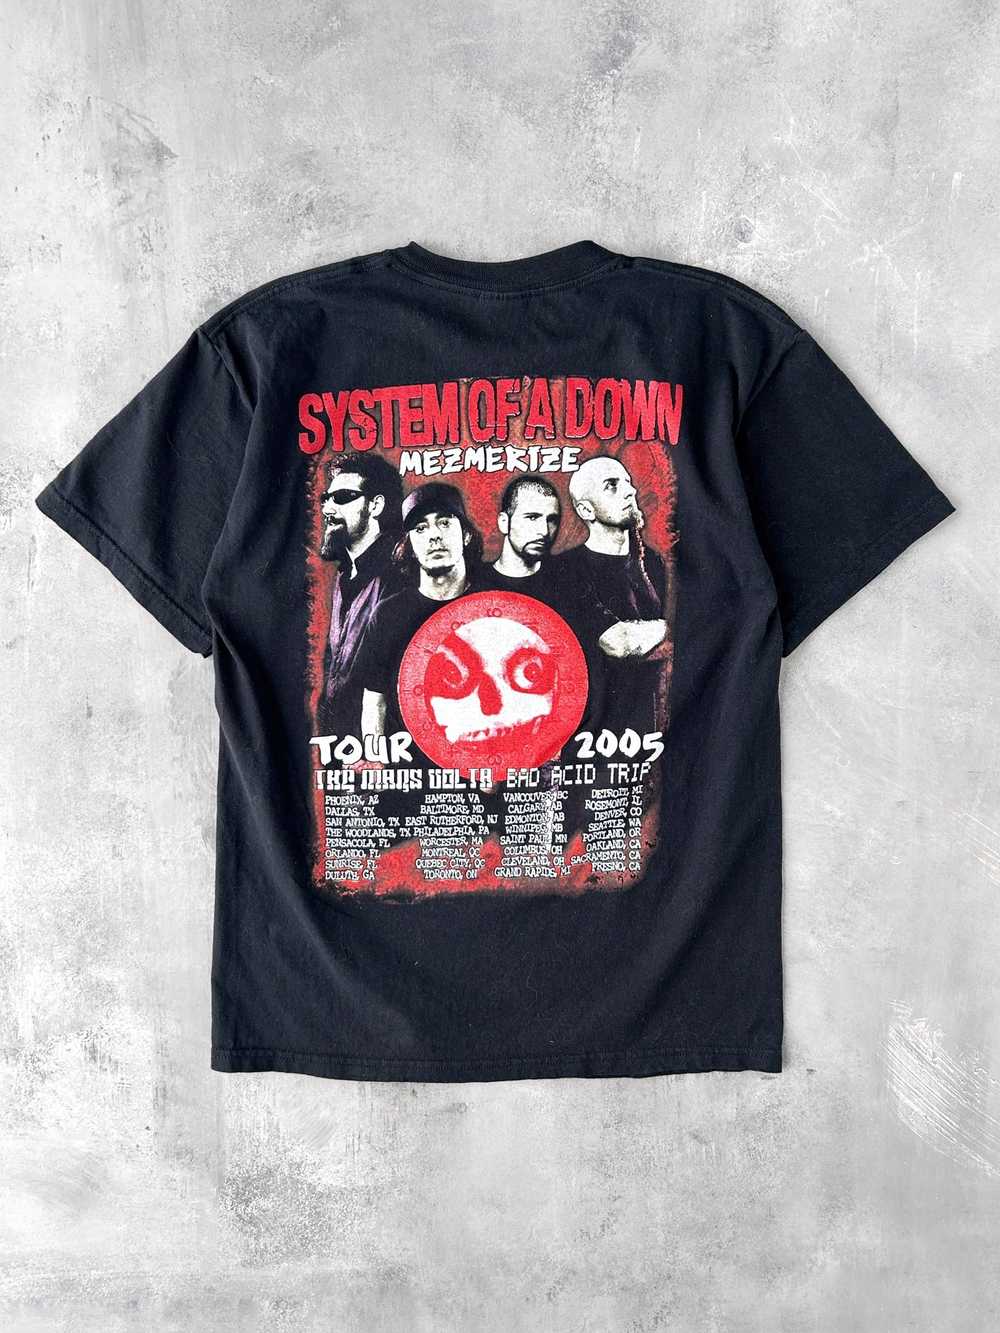 System of a Down Tour T-Shirt '05 - Large - image 2